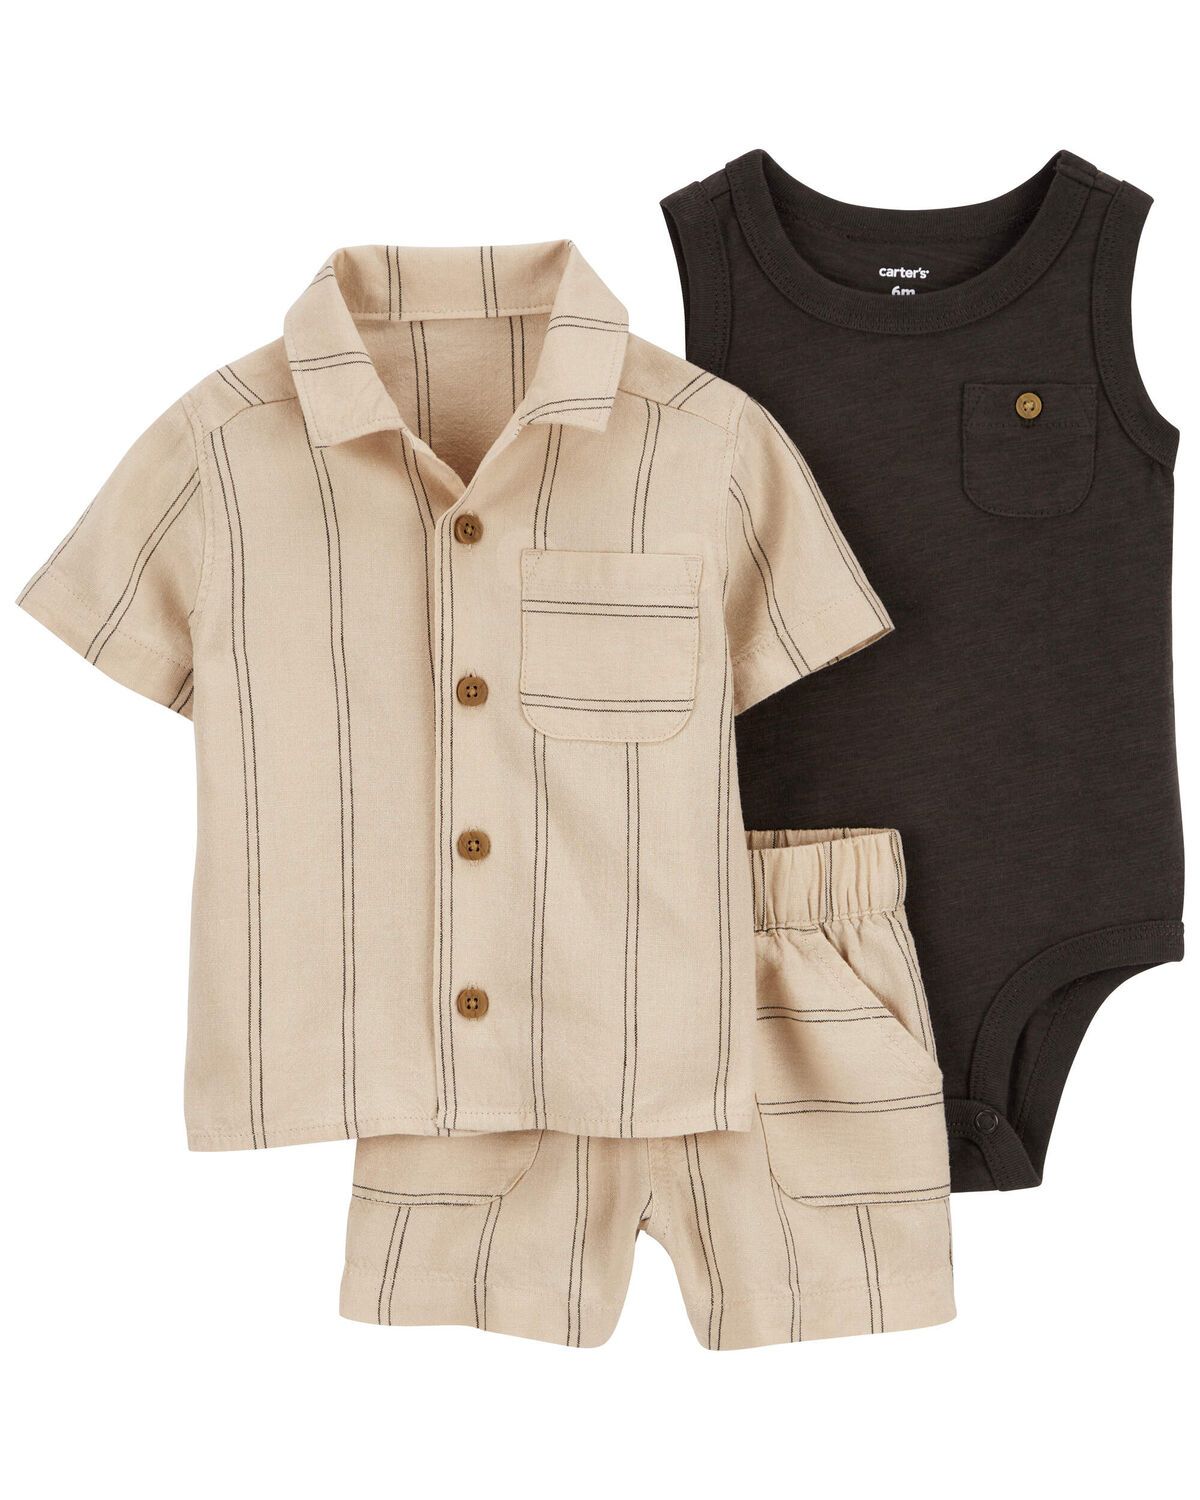 Baby 3-Piece Outfit Set Made With LENZING™ ECOVERO™ | Carter's